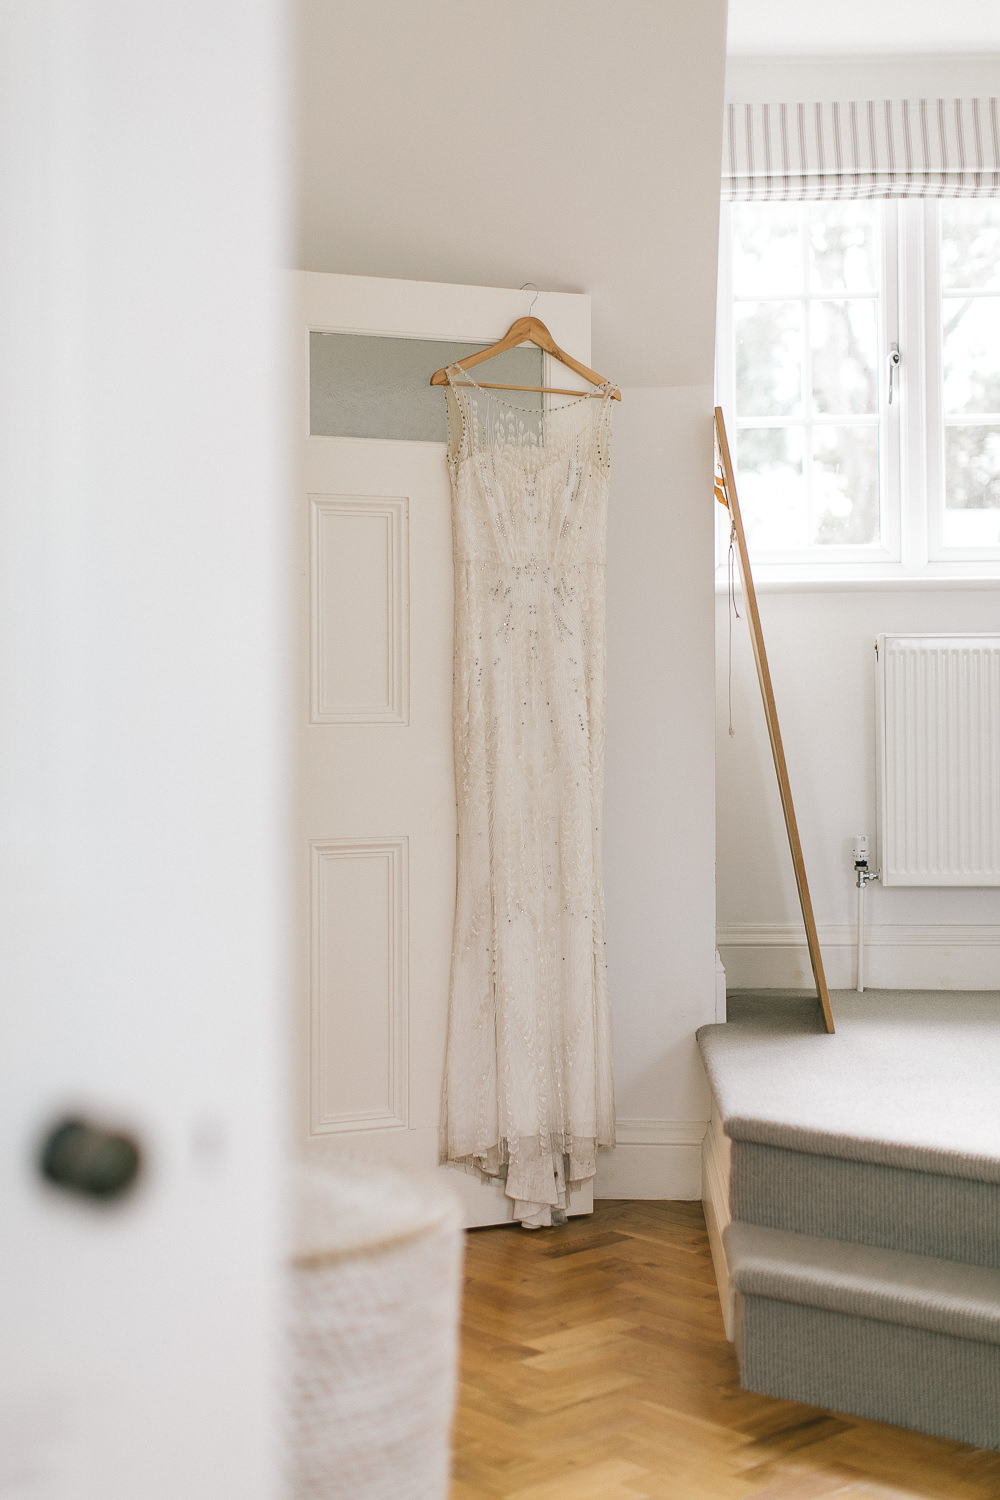 How to Display Your Wedding Dress After Your Wedding